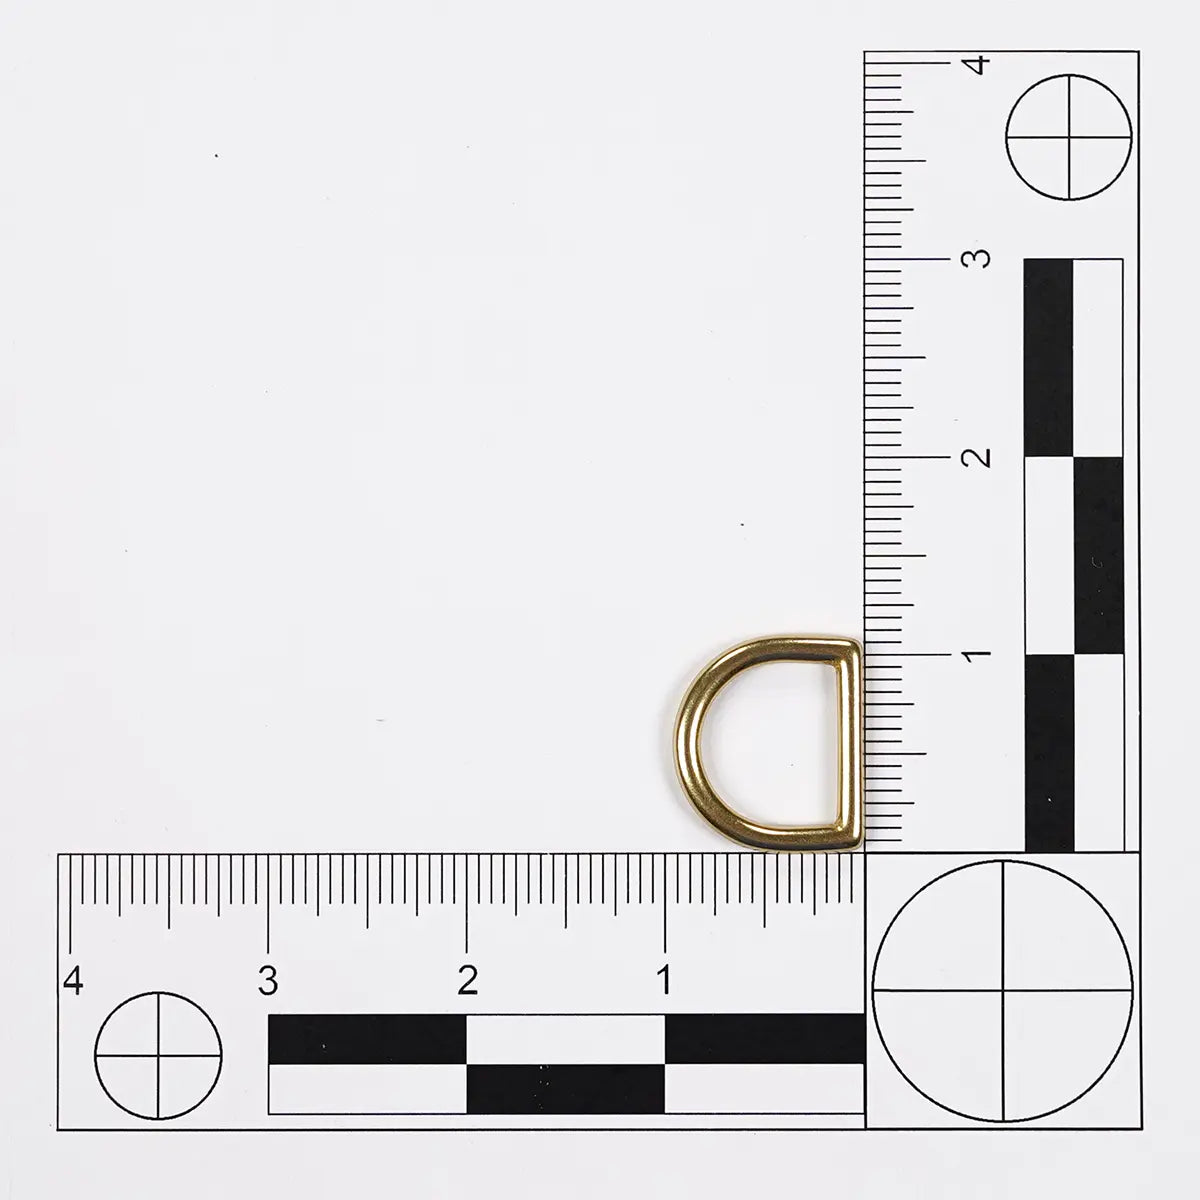 3/4" Solid Brass D-Ring